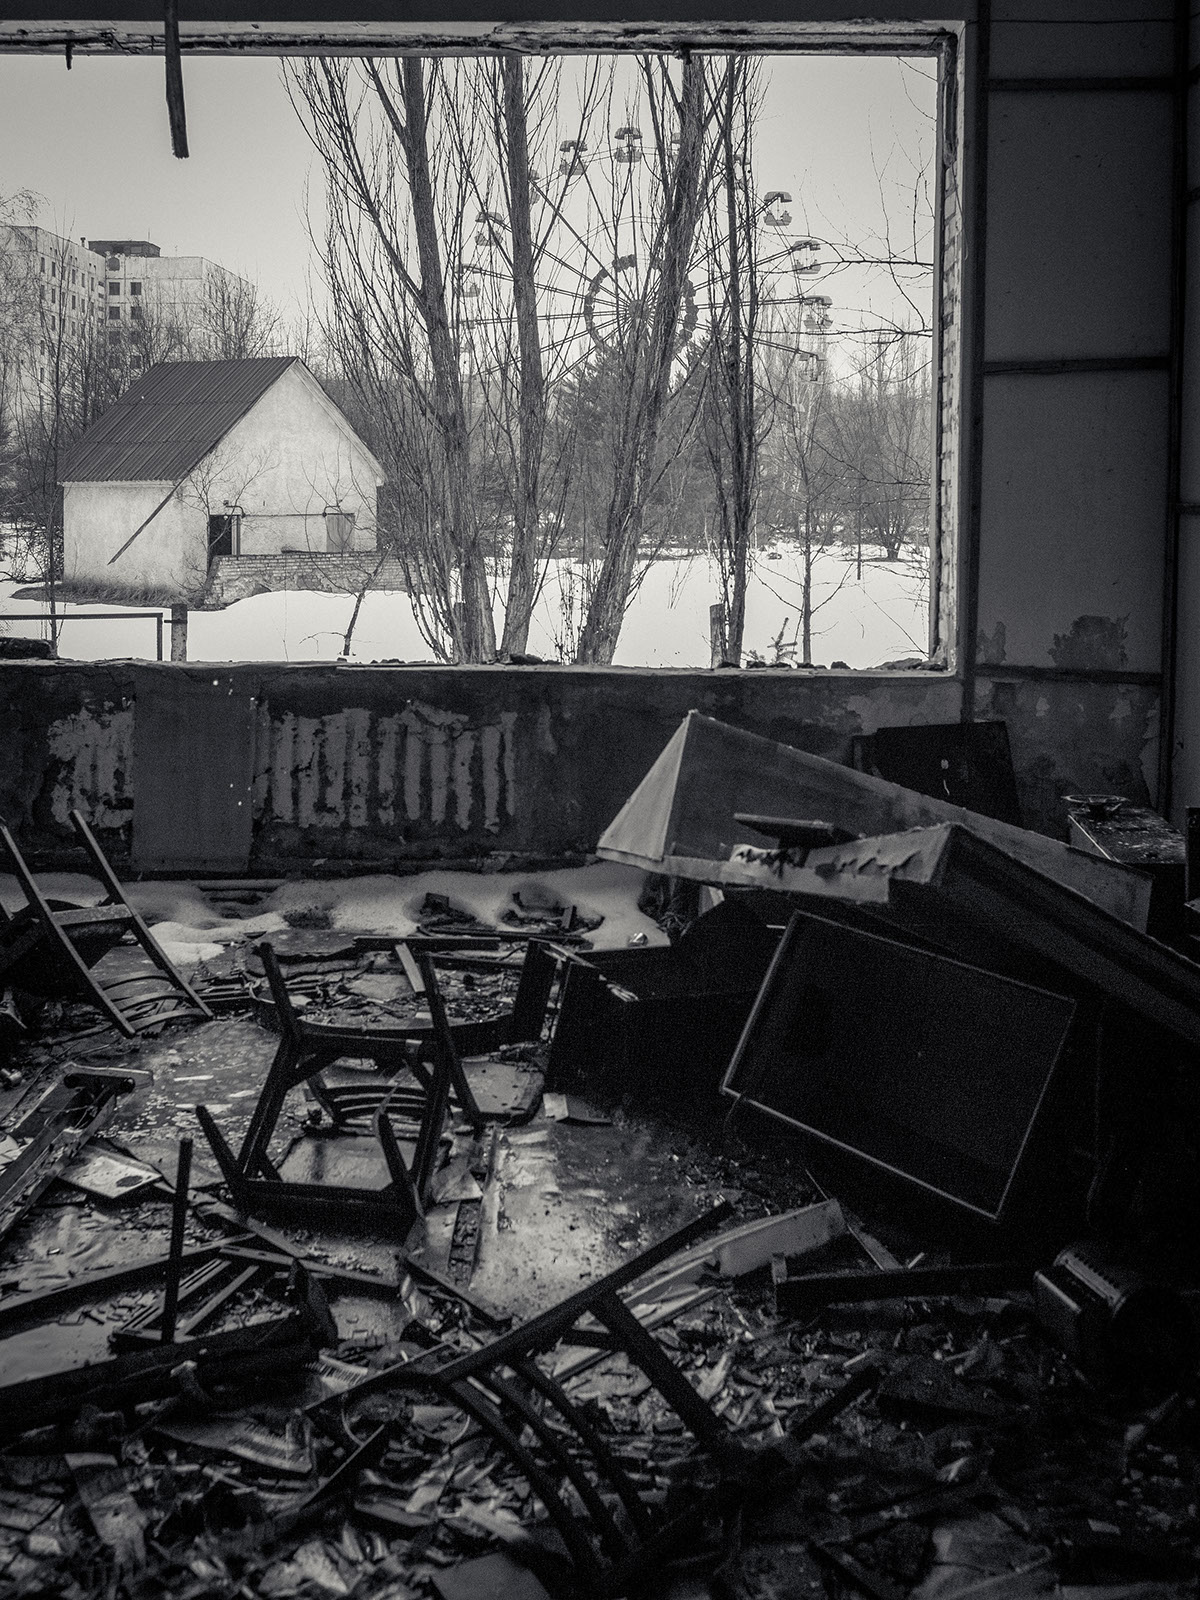 chernobyl pripyat nuclear Leica monochrom disaster accident m9 Summicron 35mm F2